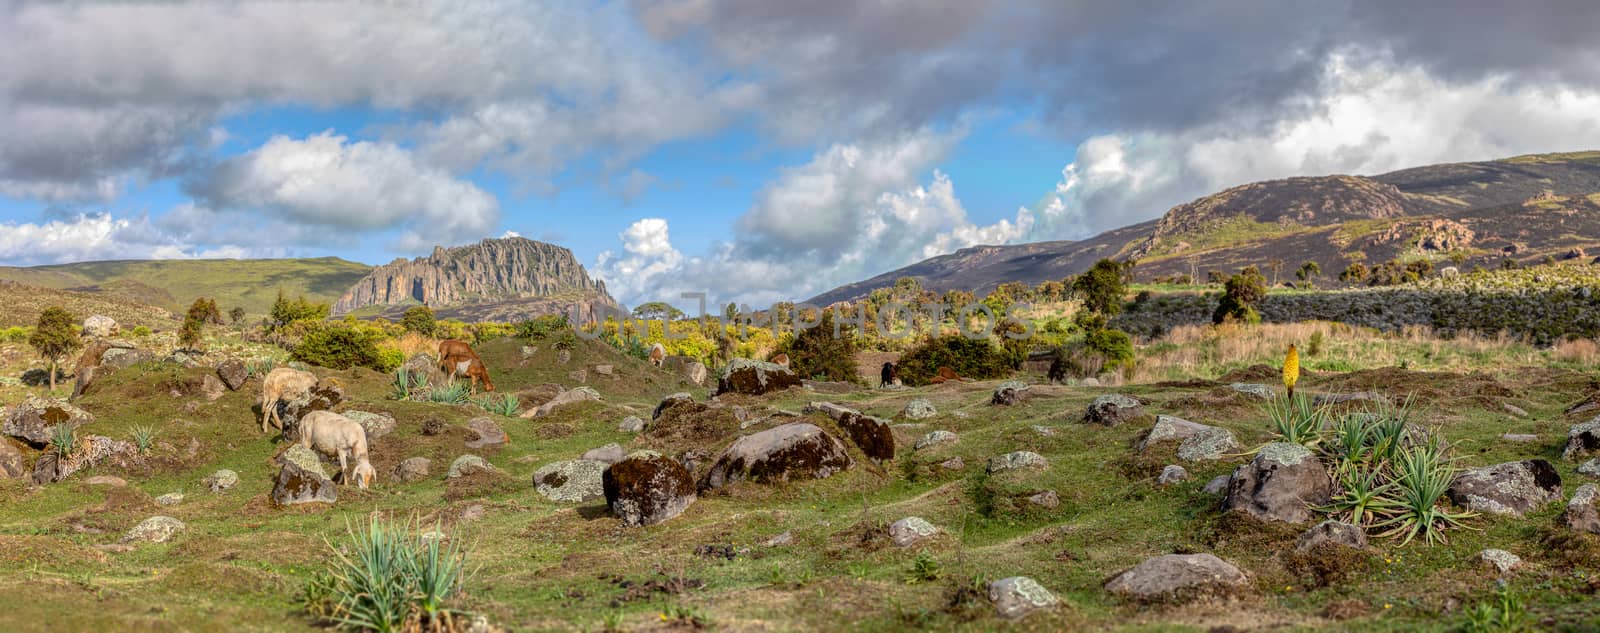 beautiful landscape of the Ethiopian Bale Mountains National Park. Ethiopia wilderness pure nature. Sunny day with blue sky.